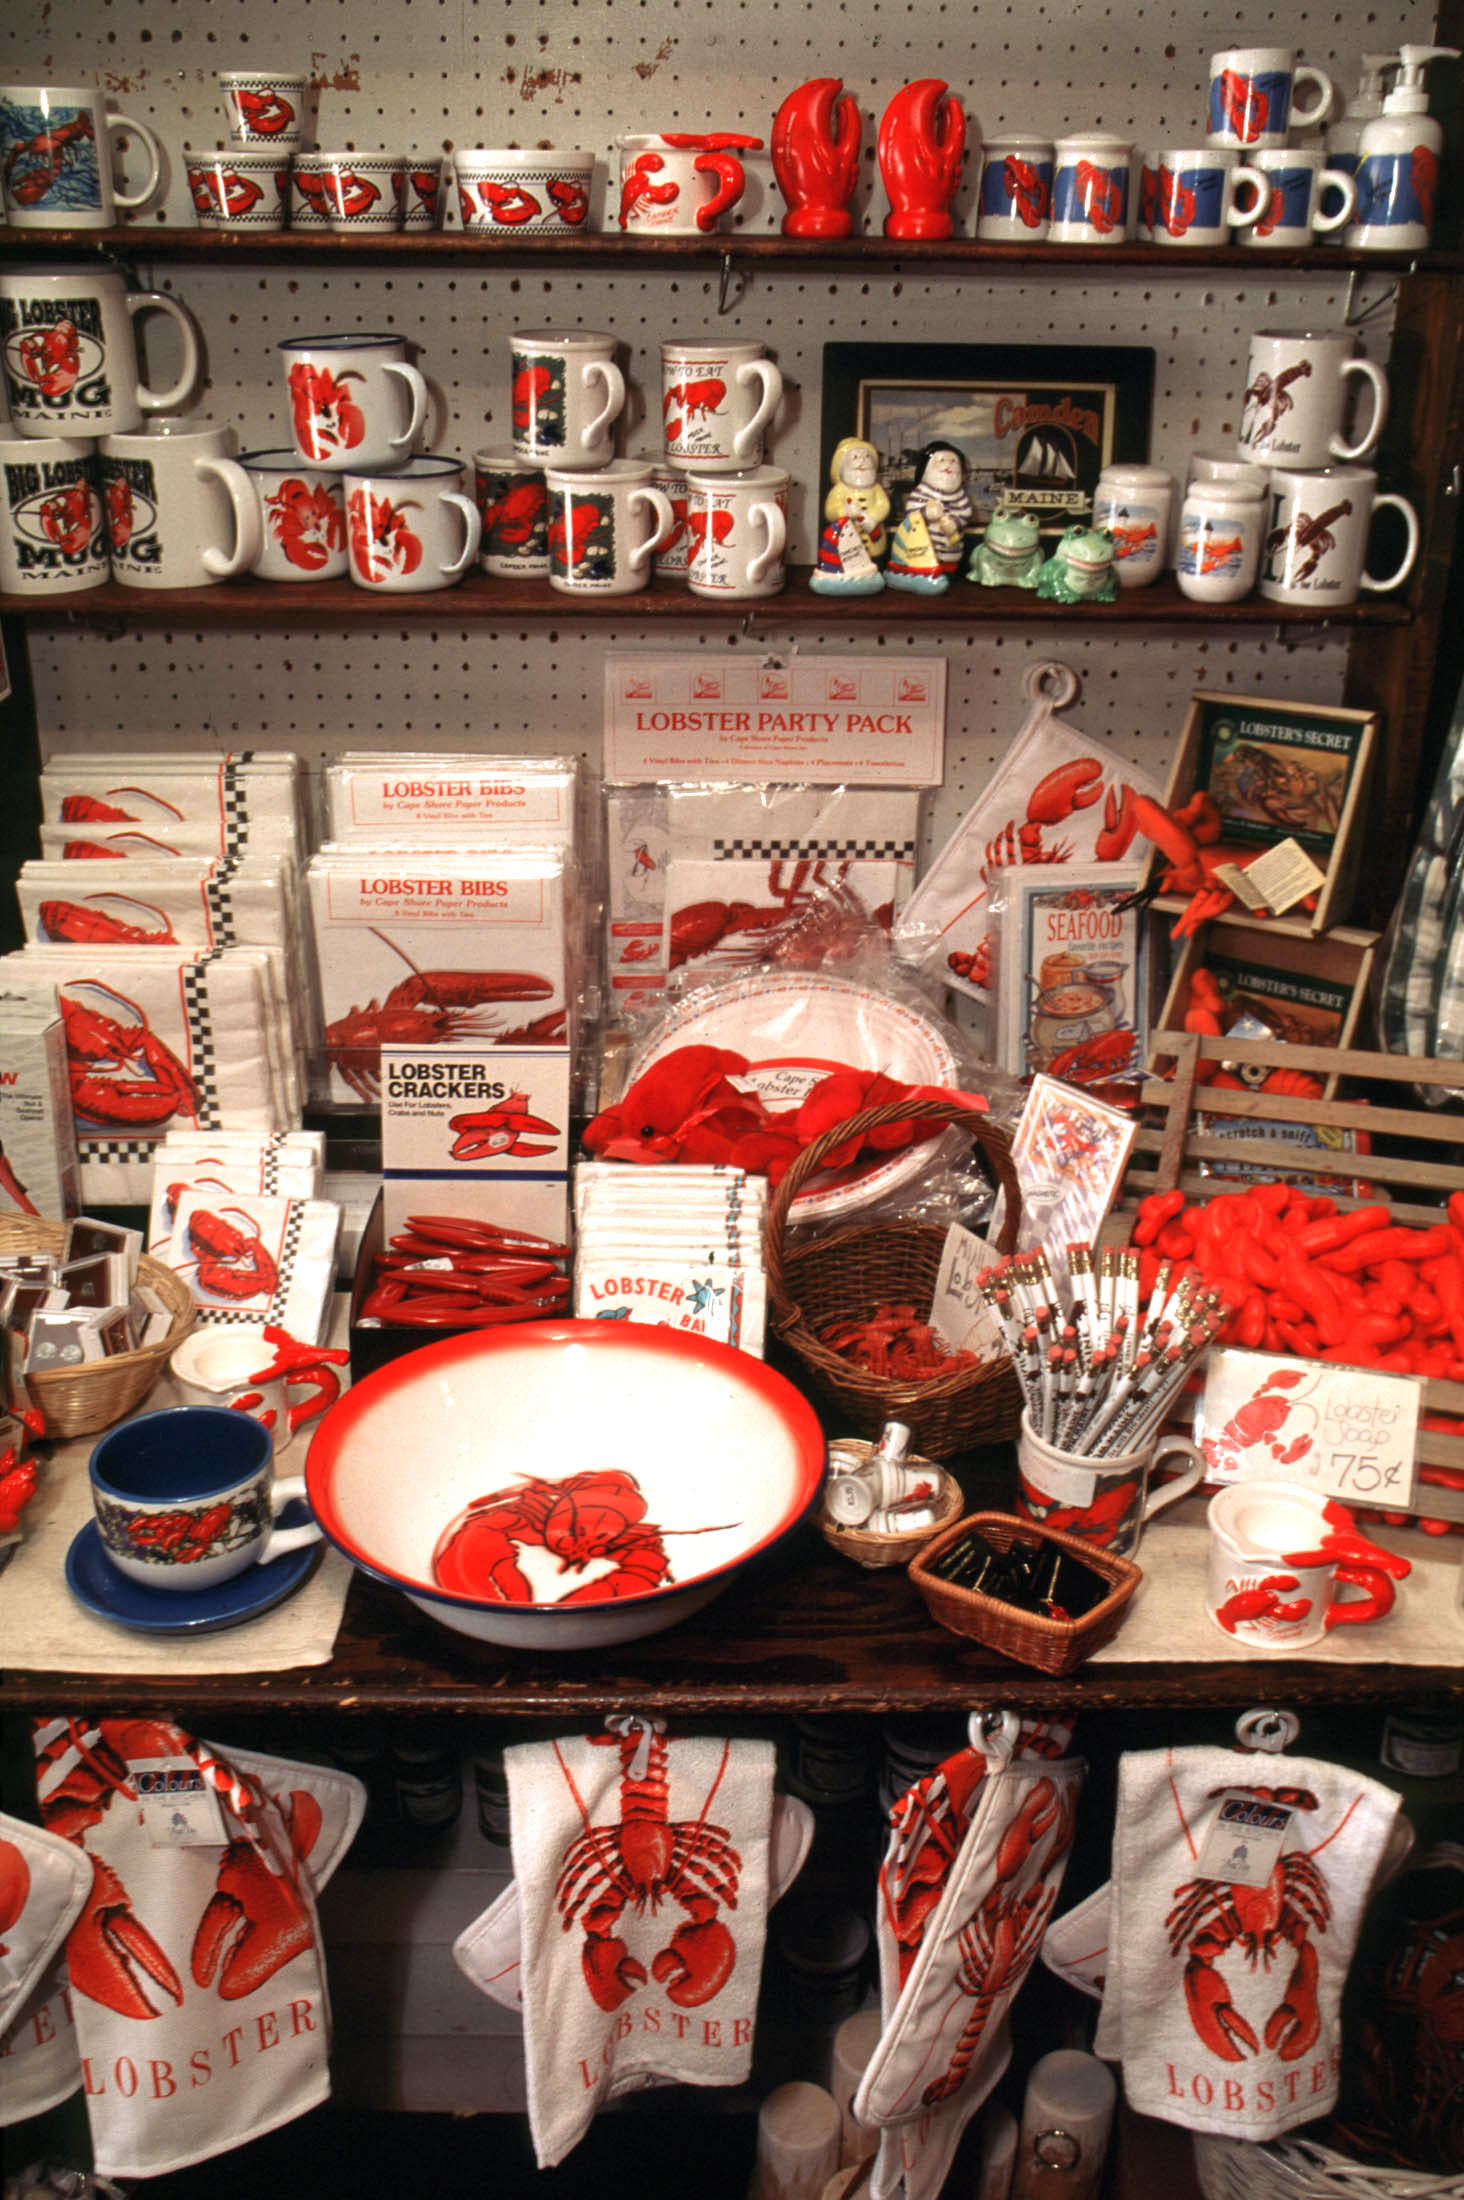 Lobster-print souvenirs in a store in Maine